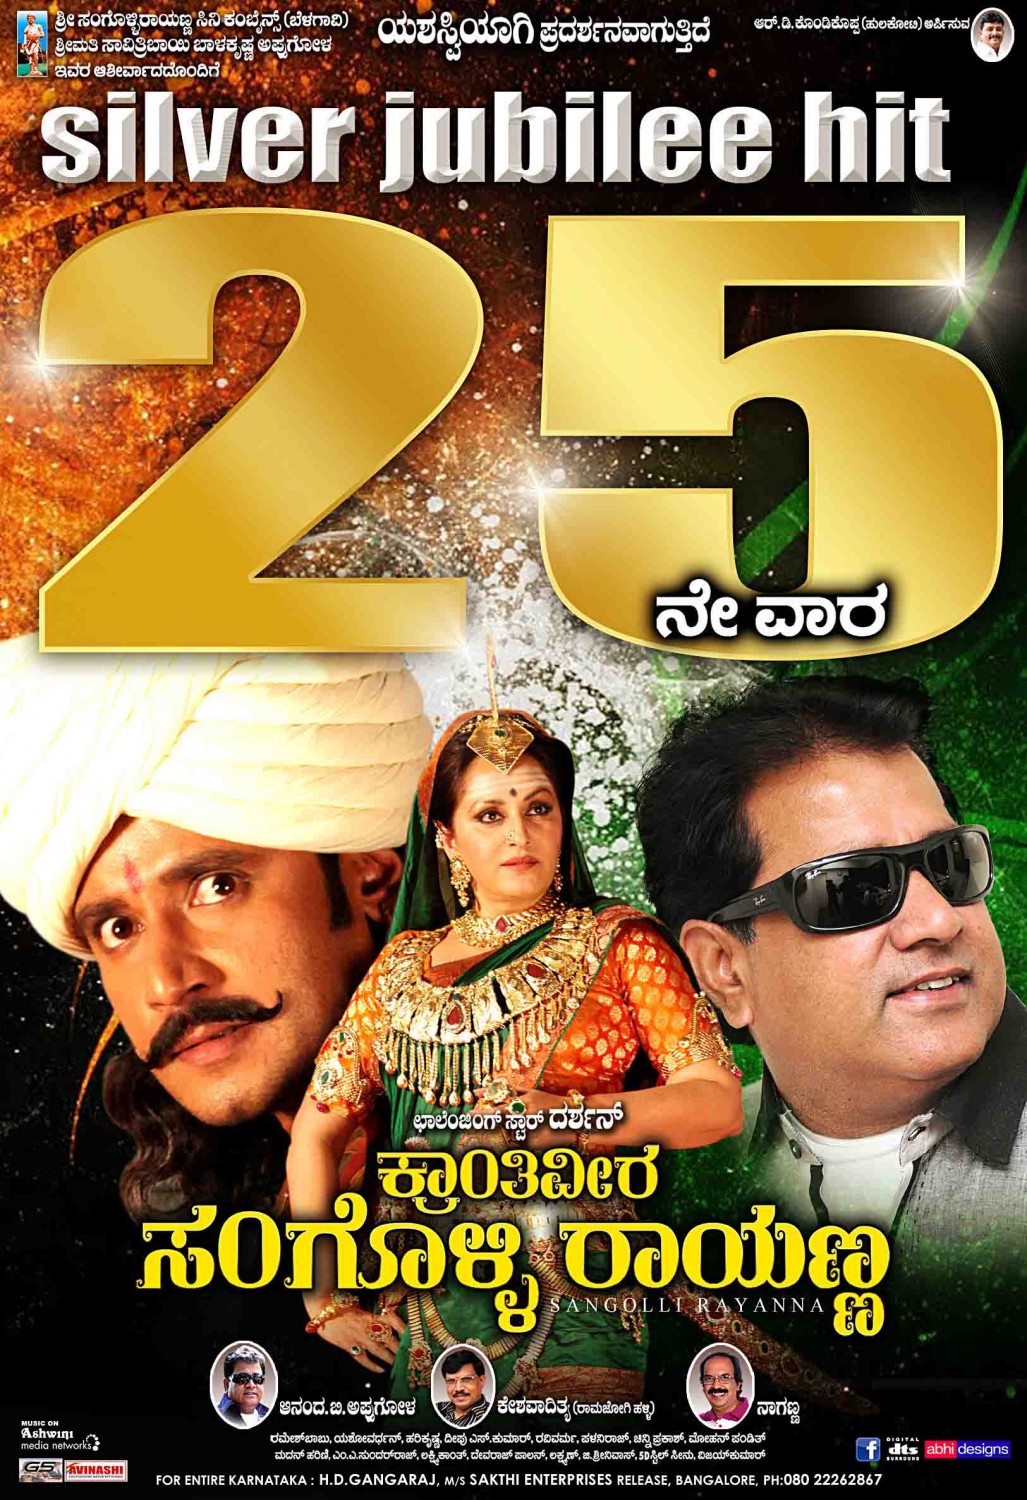 Extra Large Movie Poster Image for Sangolli Rayanna (#73 of 79)